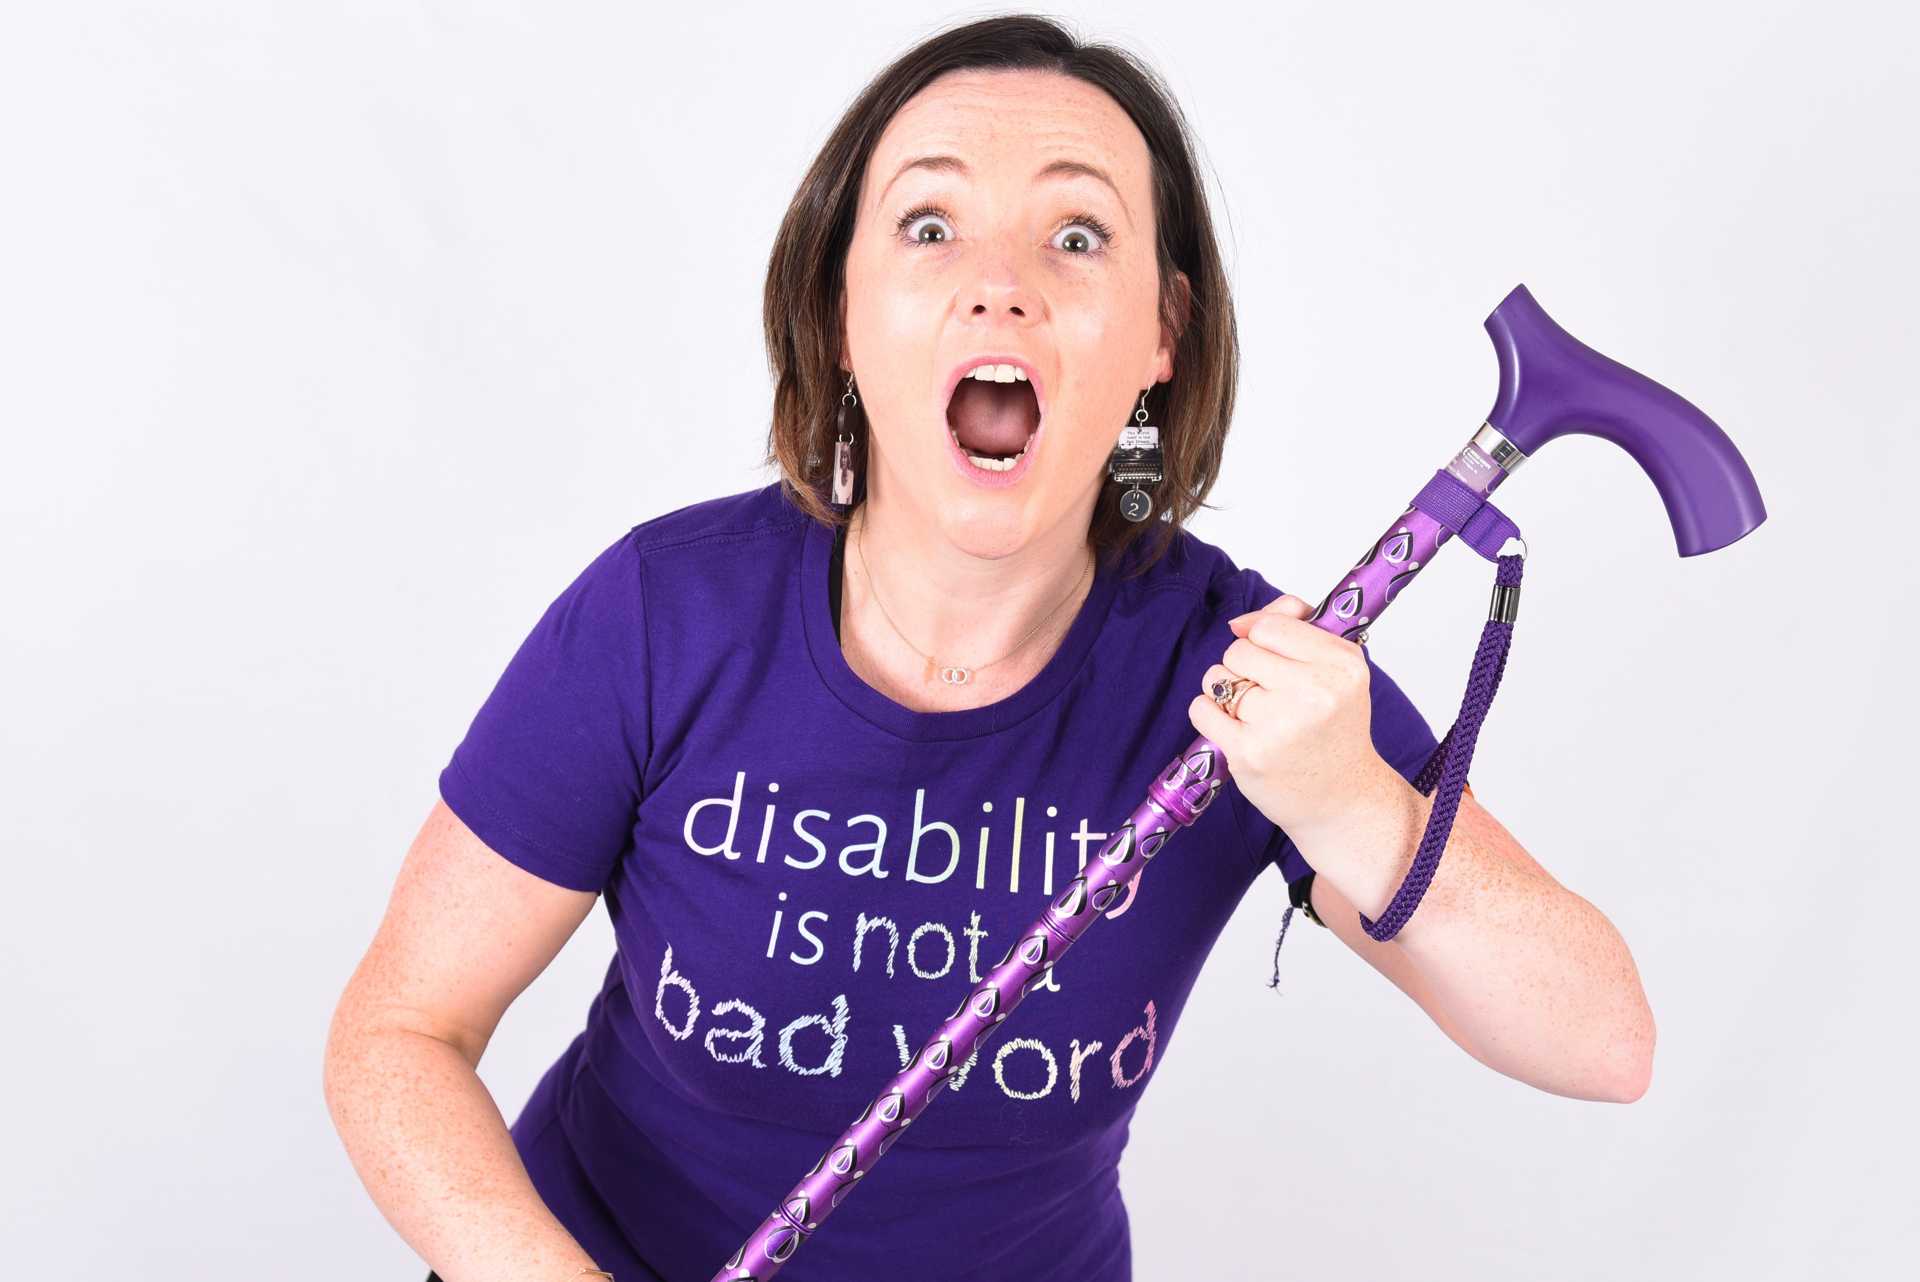 Lisette in a purple t-shirt which reads ‘disability is not a bad word’, holding her purple walking stick with her eyes and mouth wide open